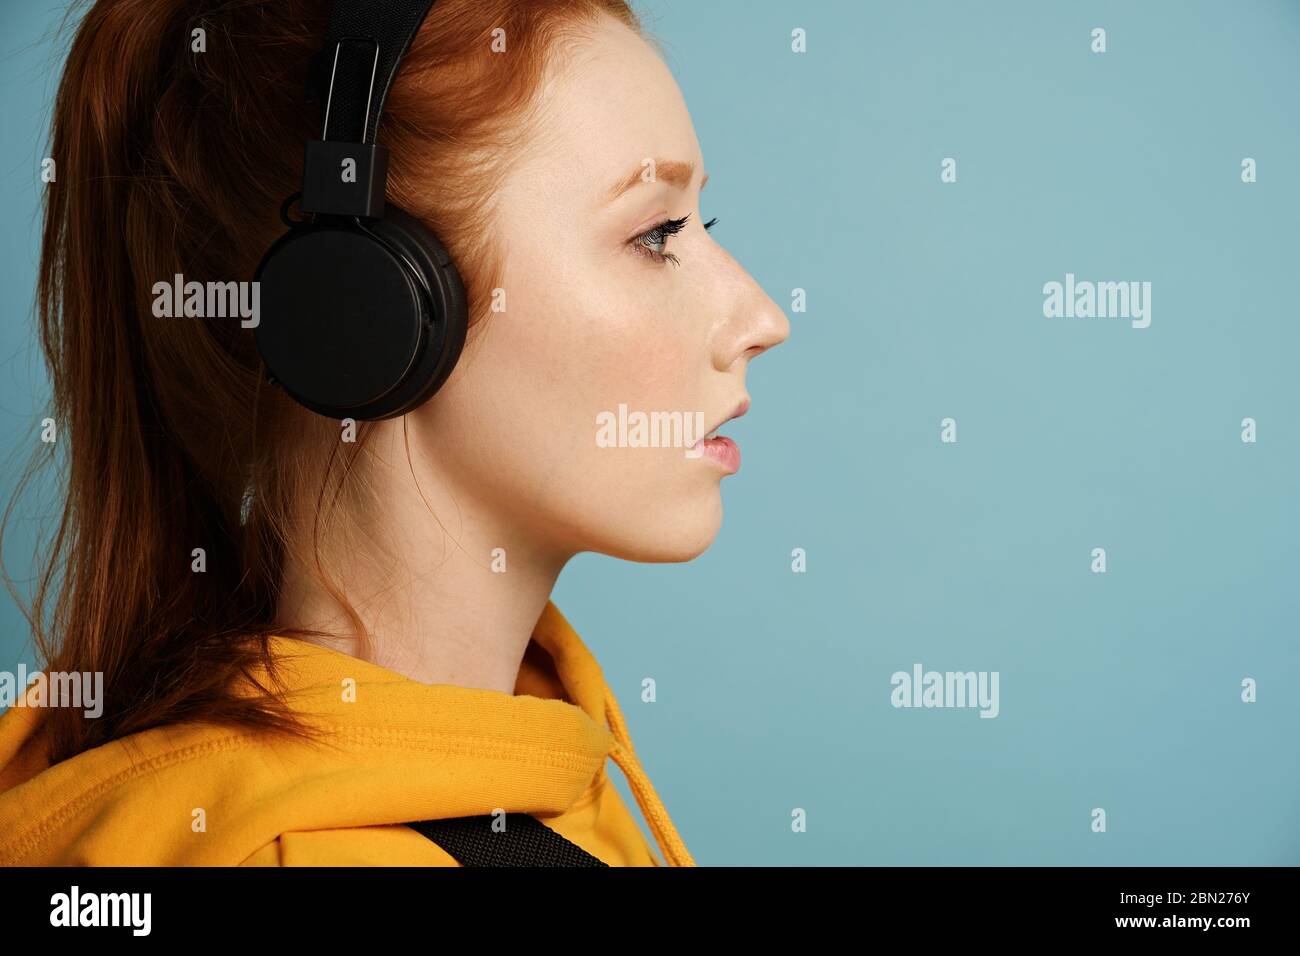 Head shot. A red-haired girl wearing headphones and a yellow hoodie stands in profile on a blue background Stock Photo